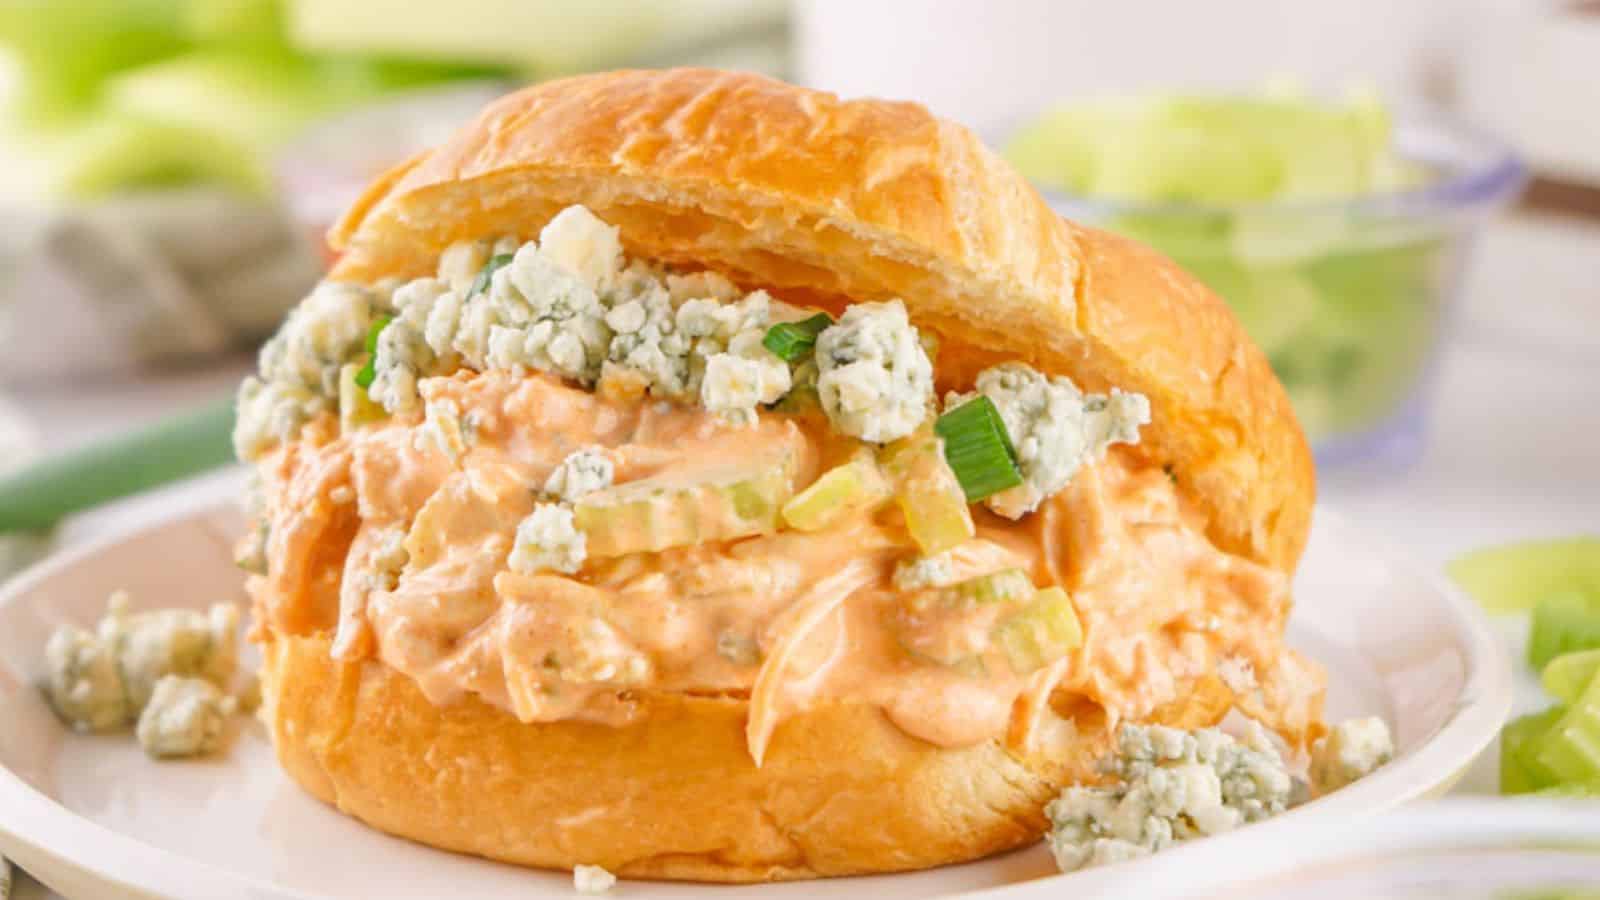 A croissant sandwich filled with buffalo chicken and blue cheese, served on a white plate with celery sticks in the background.